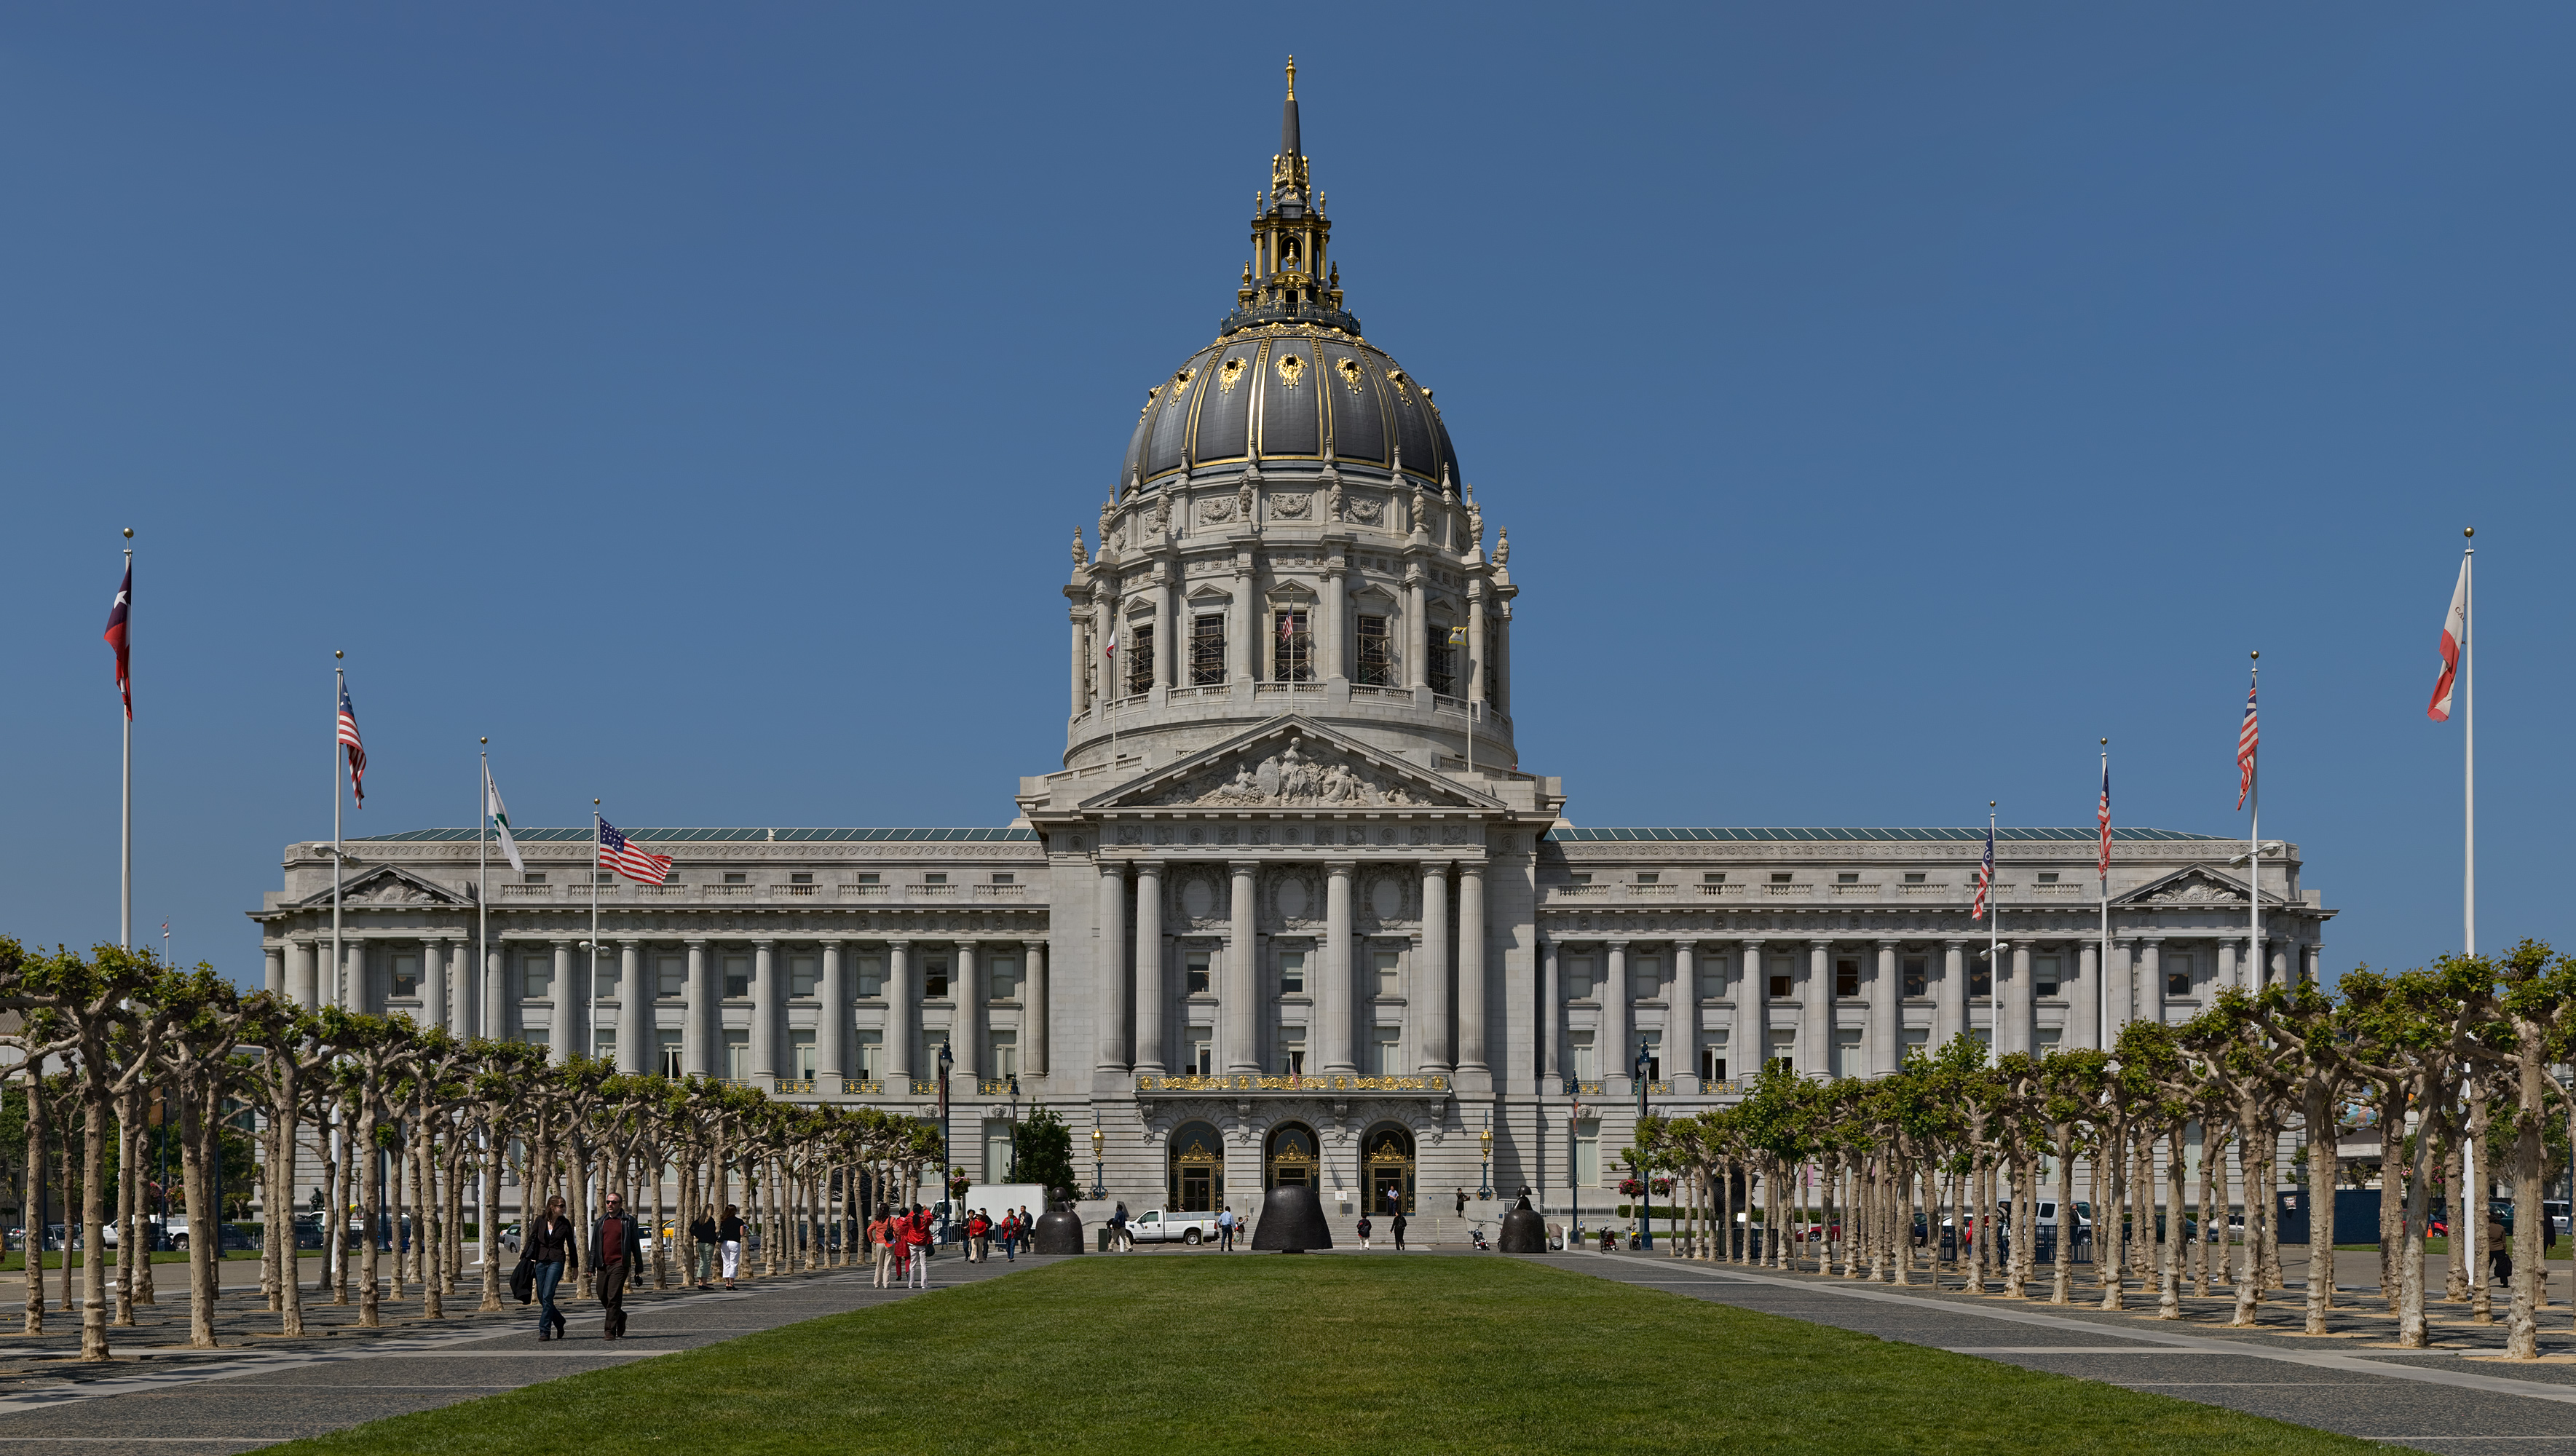 State of CA sues San Francisco for discriminating against transgender woman